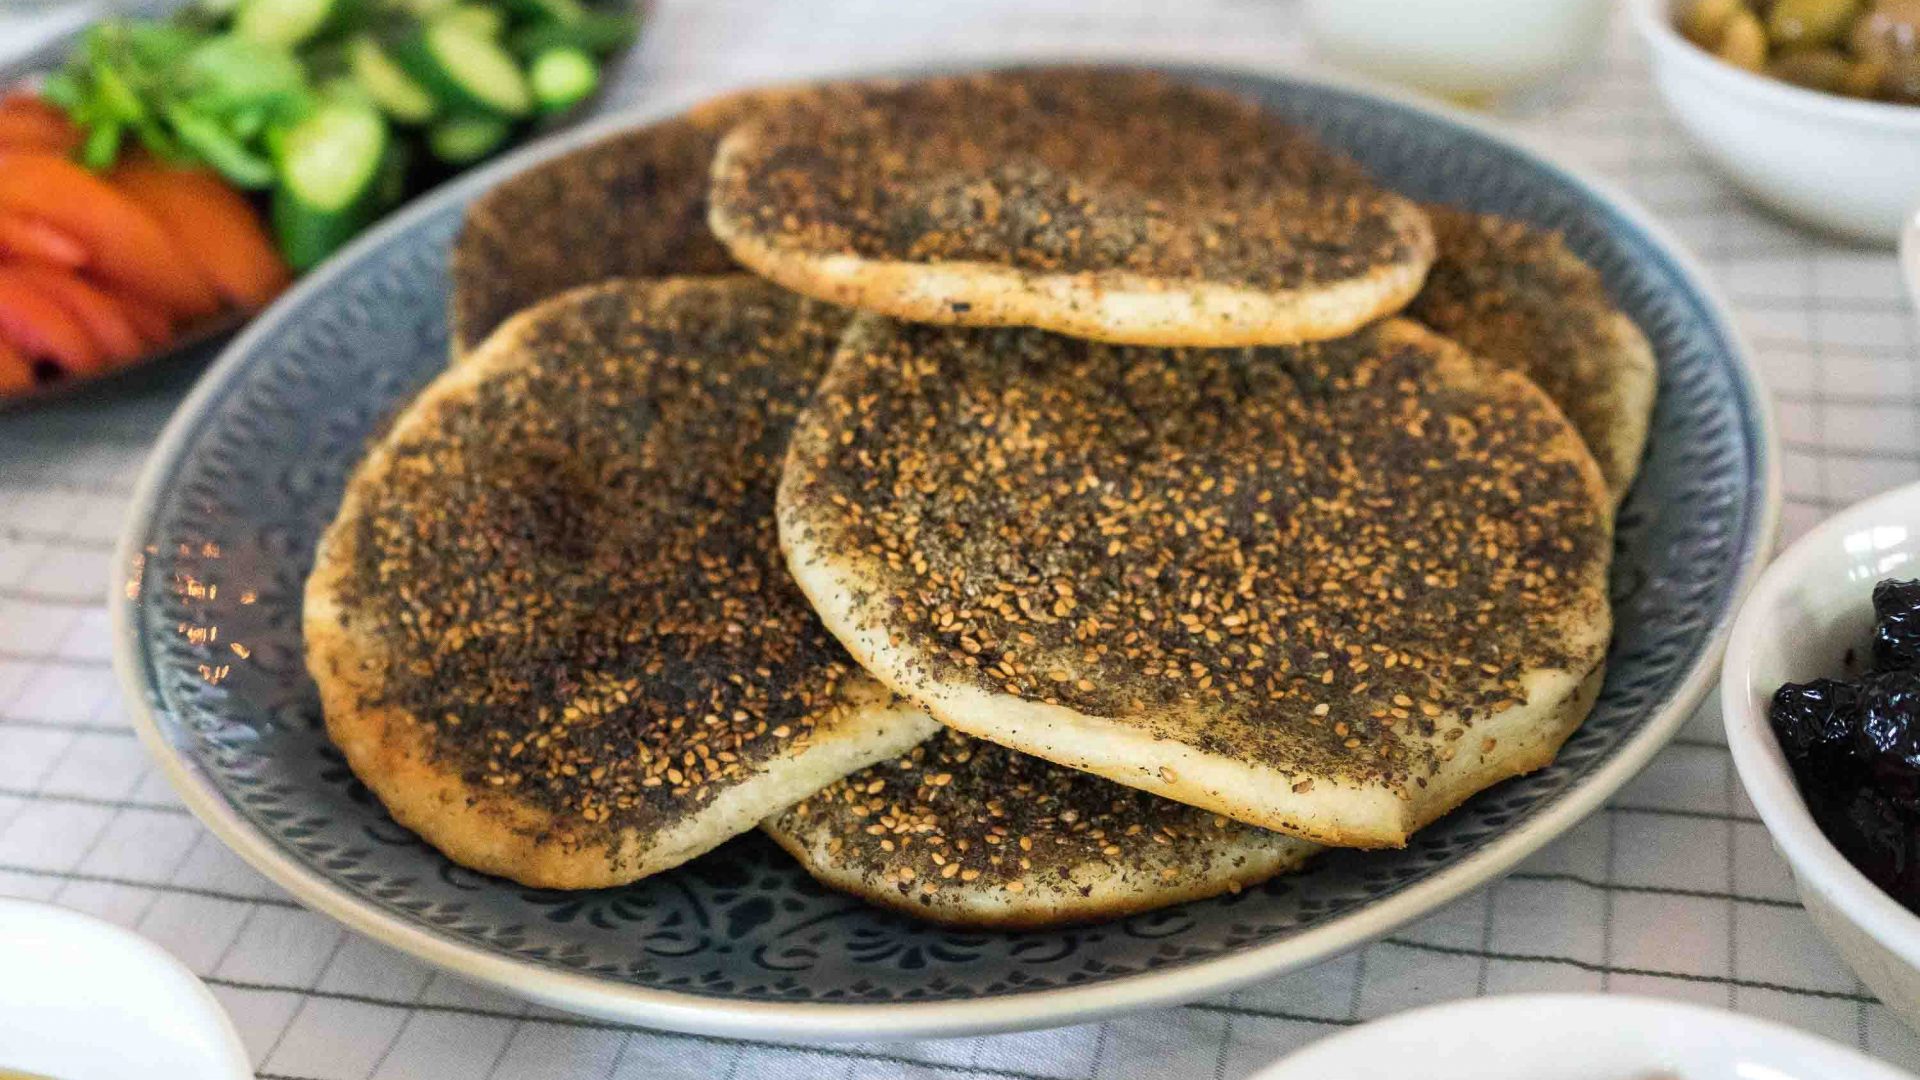 Zaatar bread, a type of pita bread topped with oregano, thyme, sumac, sesame seeds and salt mixed with olive oil, and then baked.